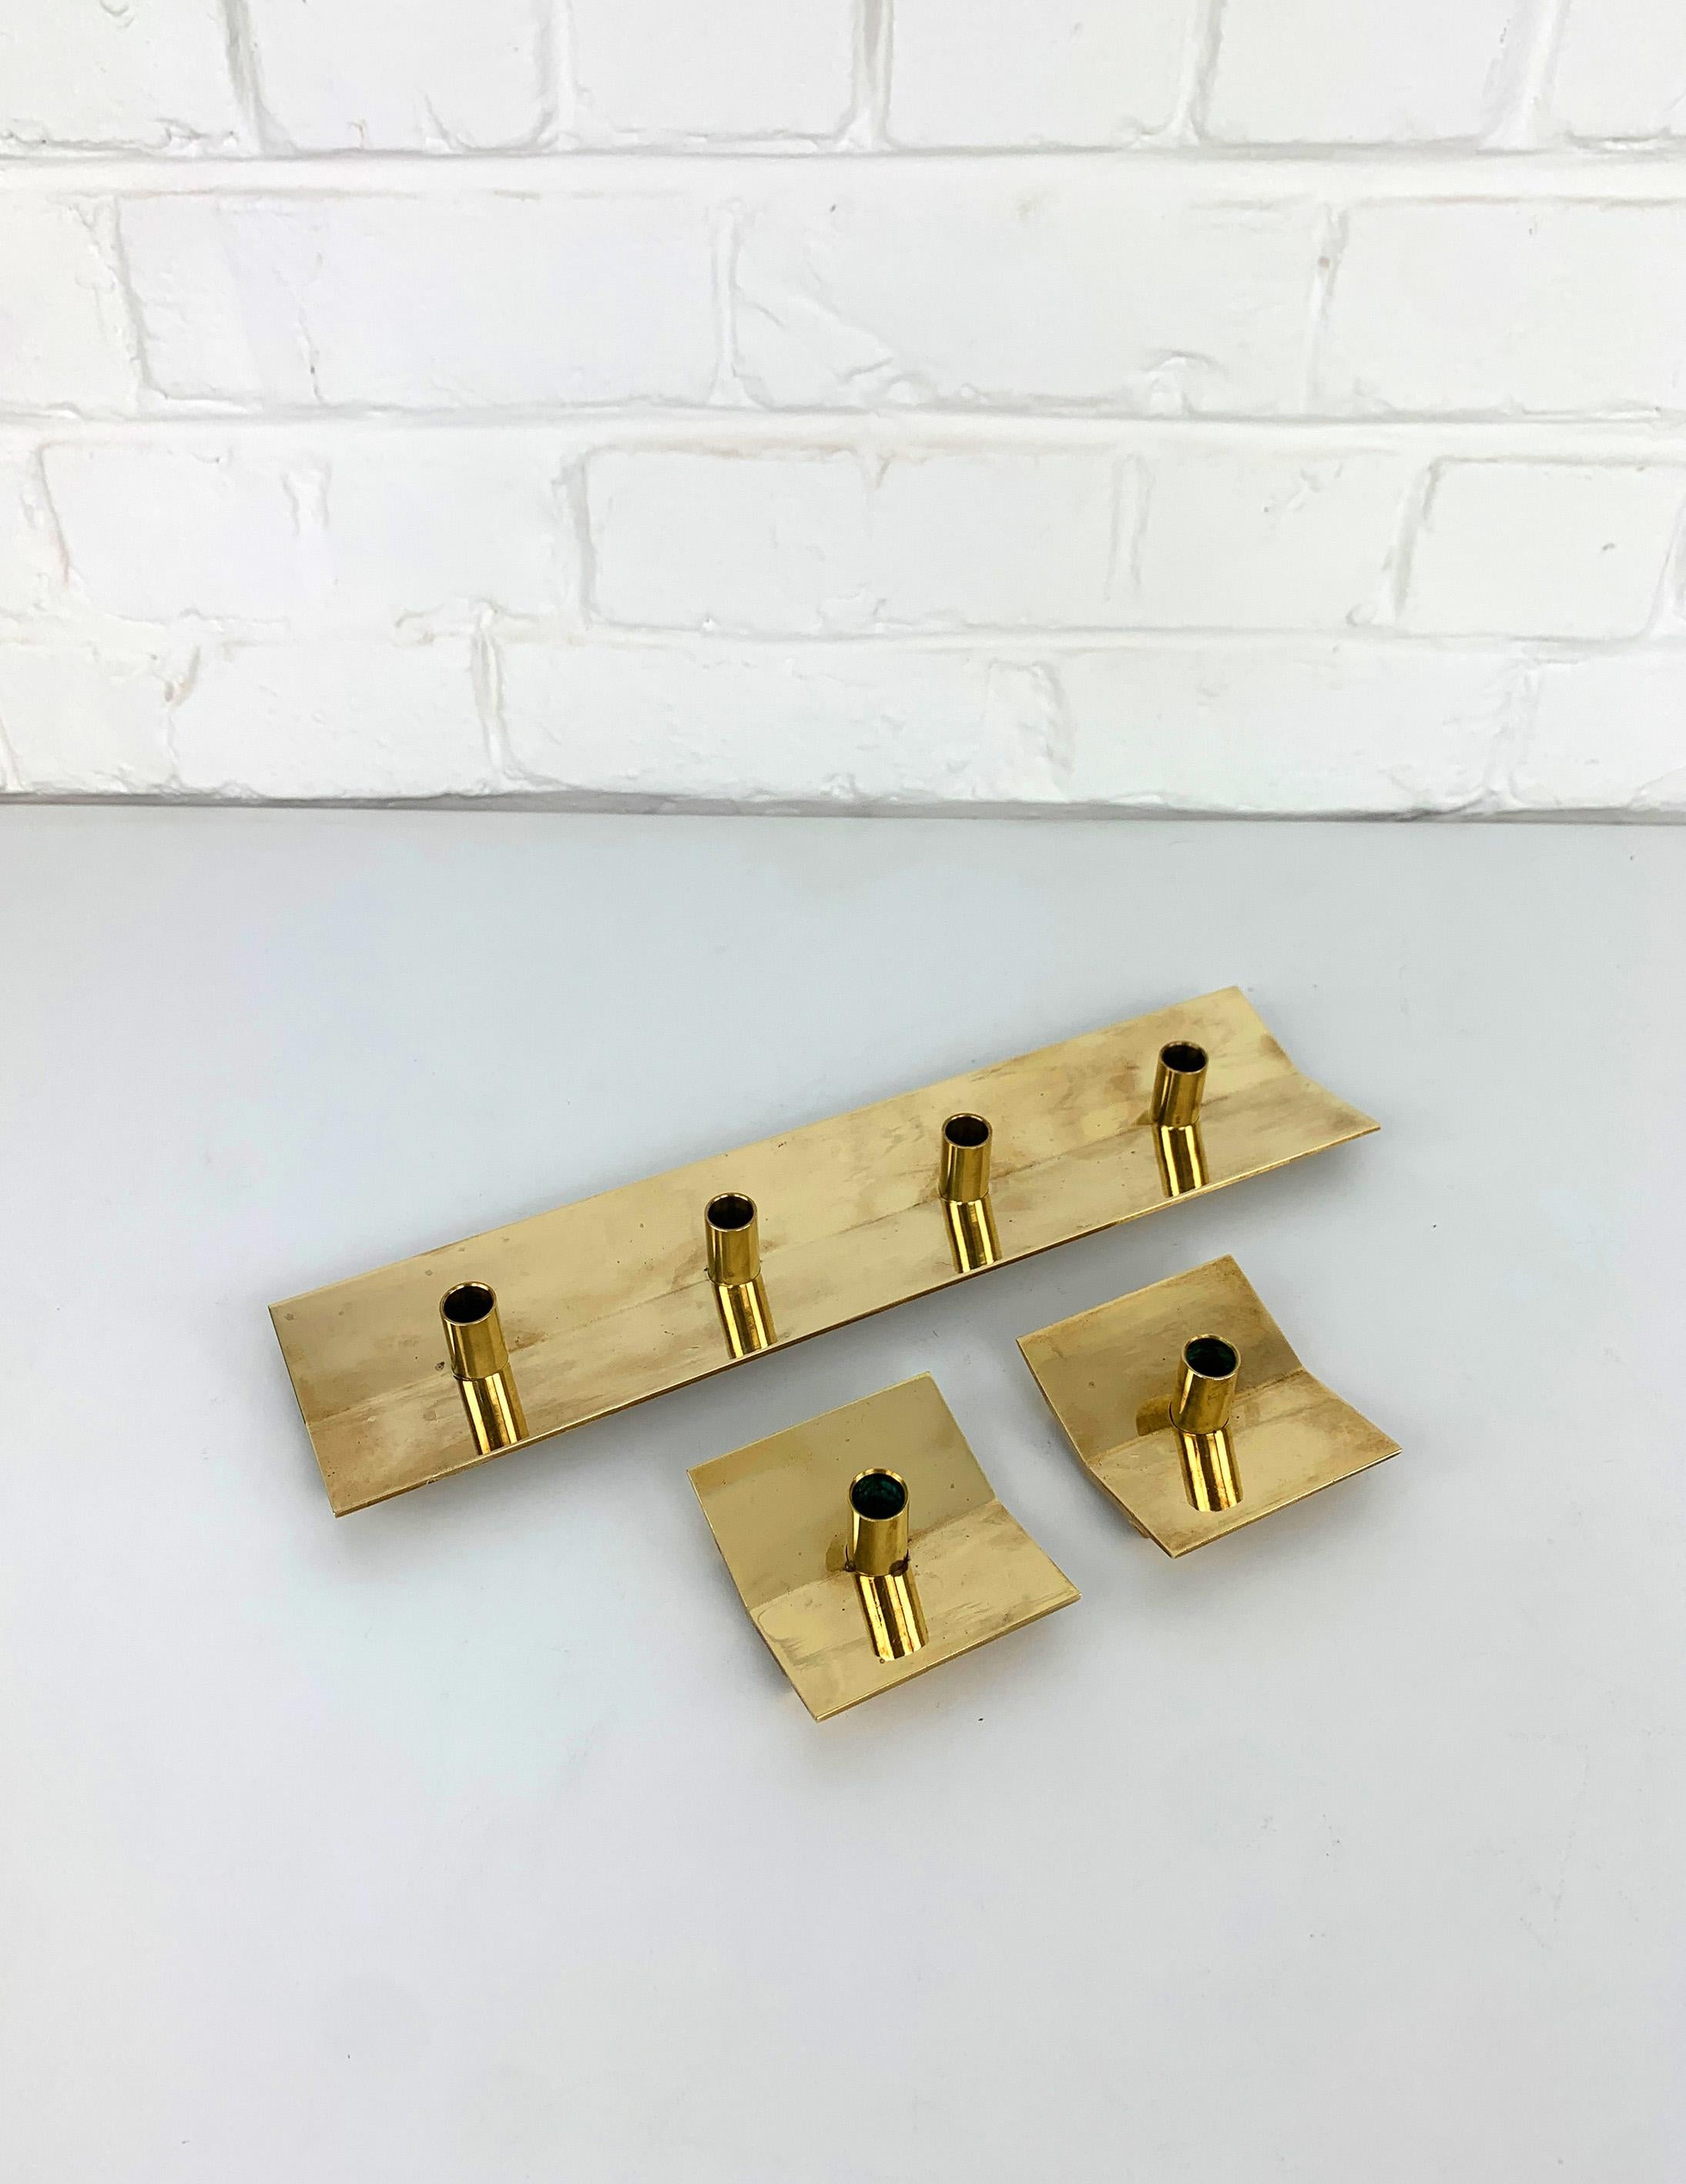 Set of 3 candleholders by Pierre Forssell made of solid brass. 

Combination of one candle-holder model N°69 for 4 candles and two candlesticks model N°70 for 1 candle each.

Designed by Pierre Forssell and manufactured in Sweden by Skultuna. The